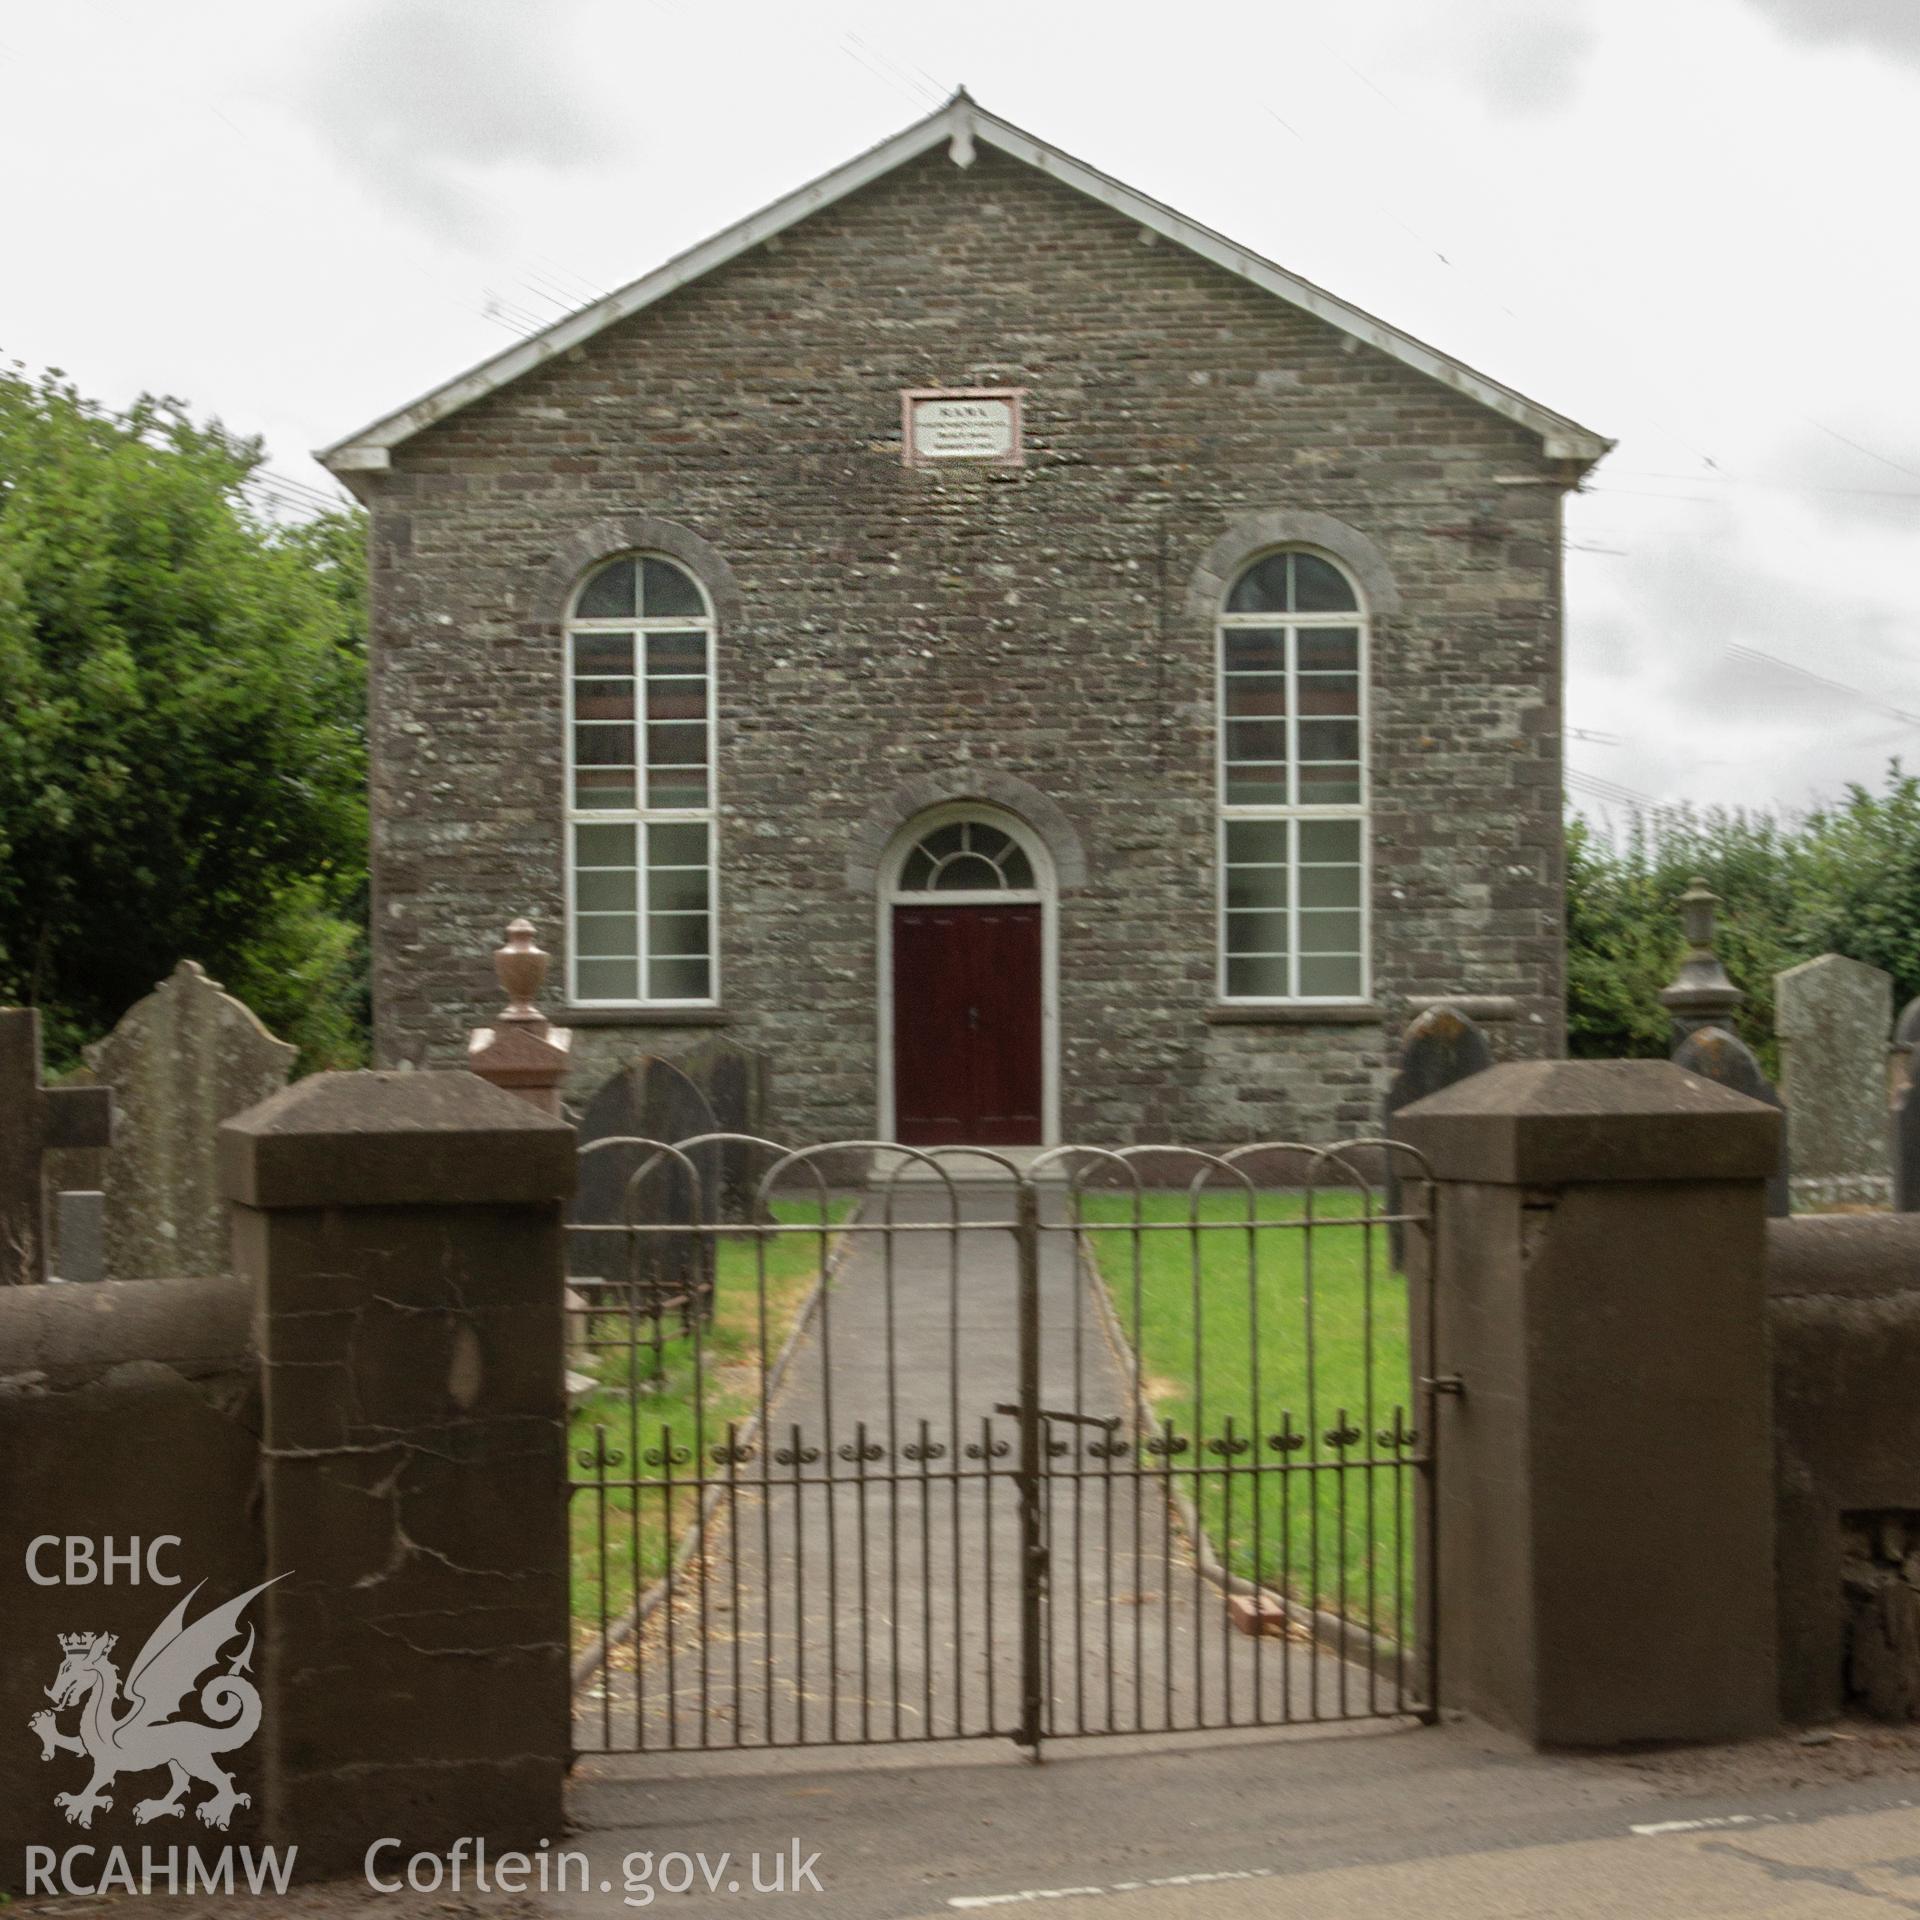 Colour photograph showing front elevation and entrance of Rama Independent Chapel, Llandyfaelog. Photographed by Richard Barrett on 16th July 2018.